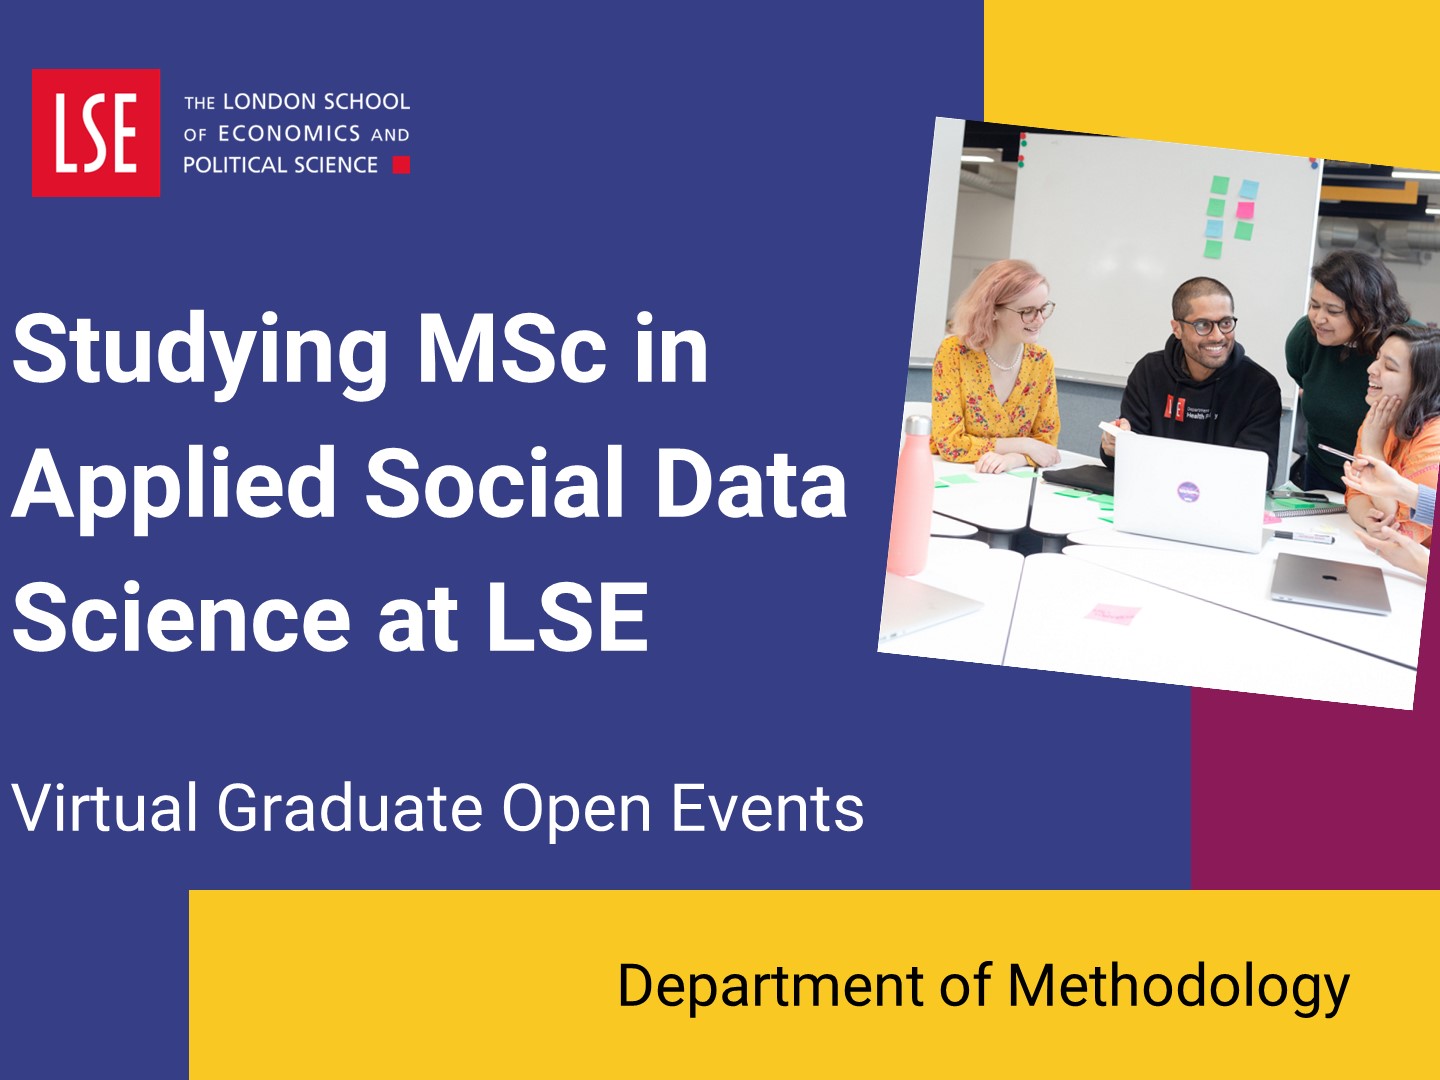 Introduction to MSc Applied Social Data Science